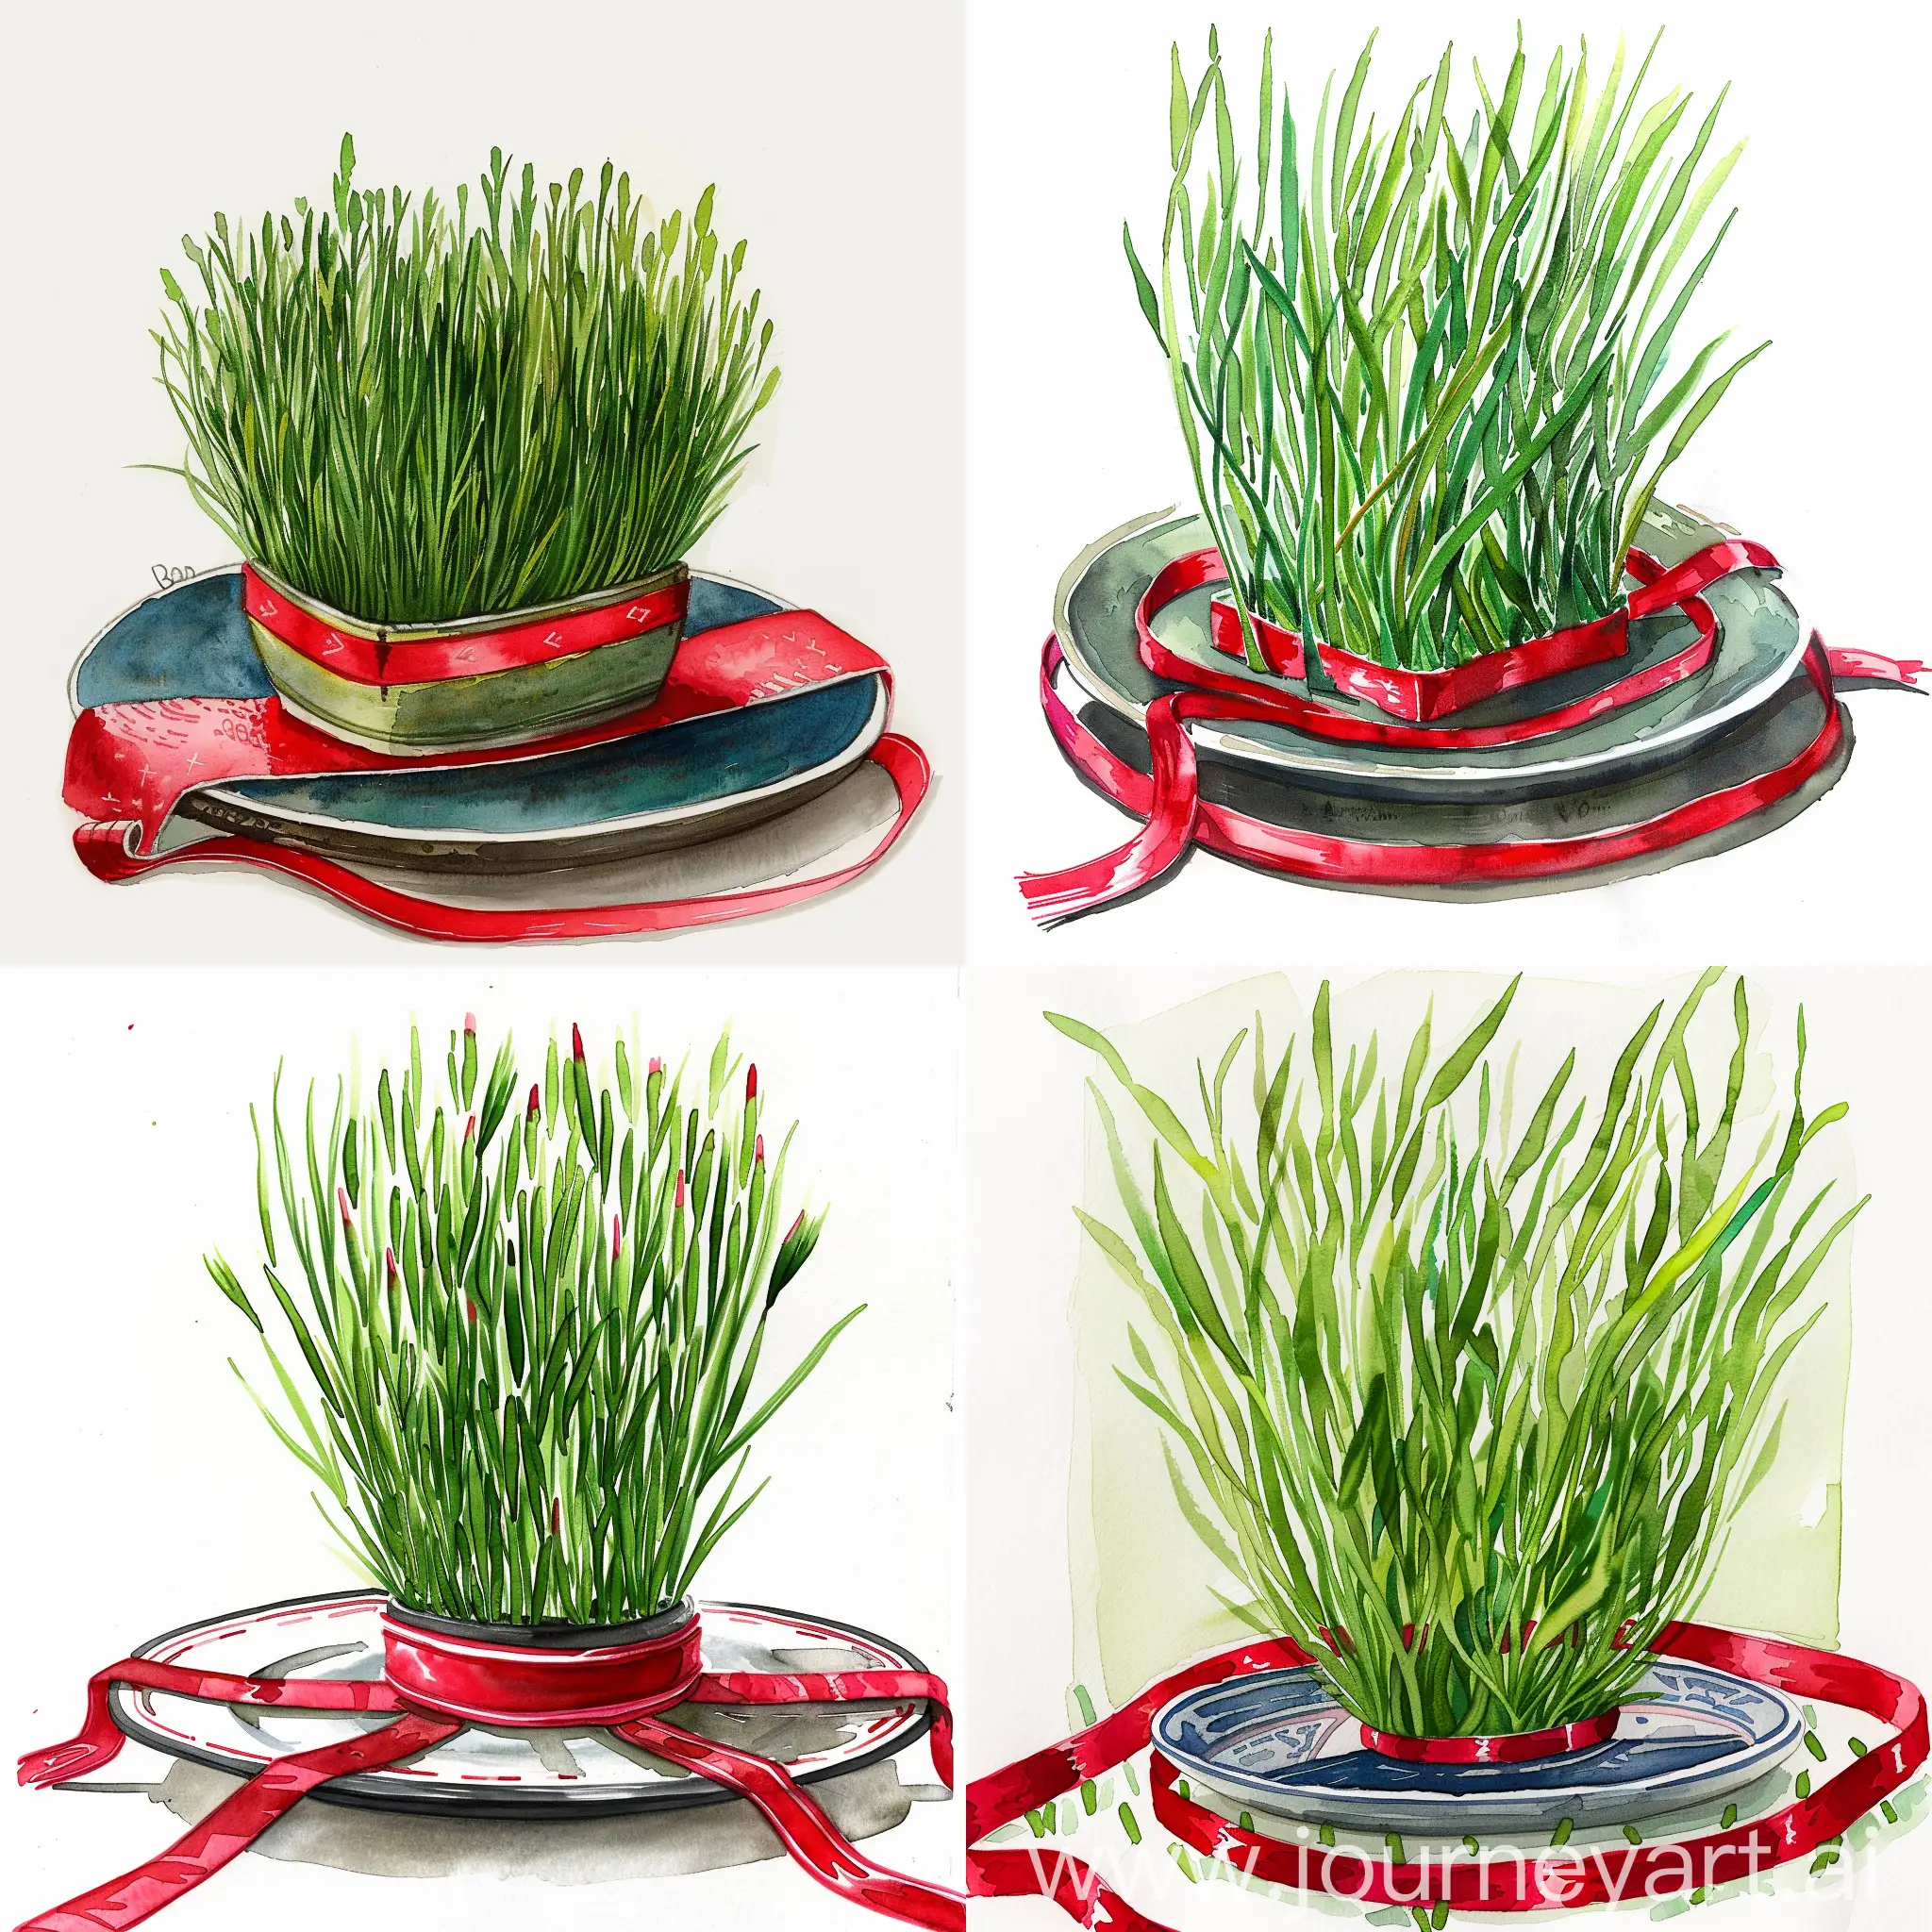 draw a watercolor of sumalak (the green grass prepared for Navruz holiday in Tajikstan) grown on a plate and there should be a red satin tape around it